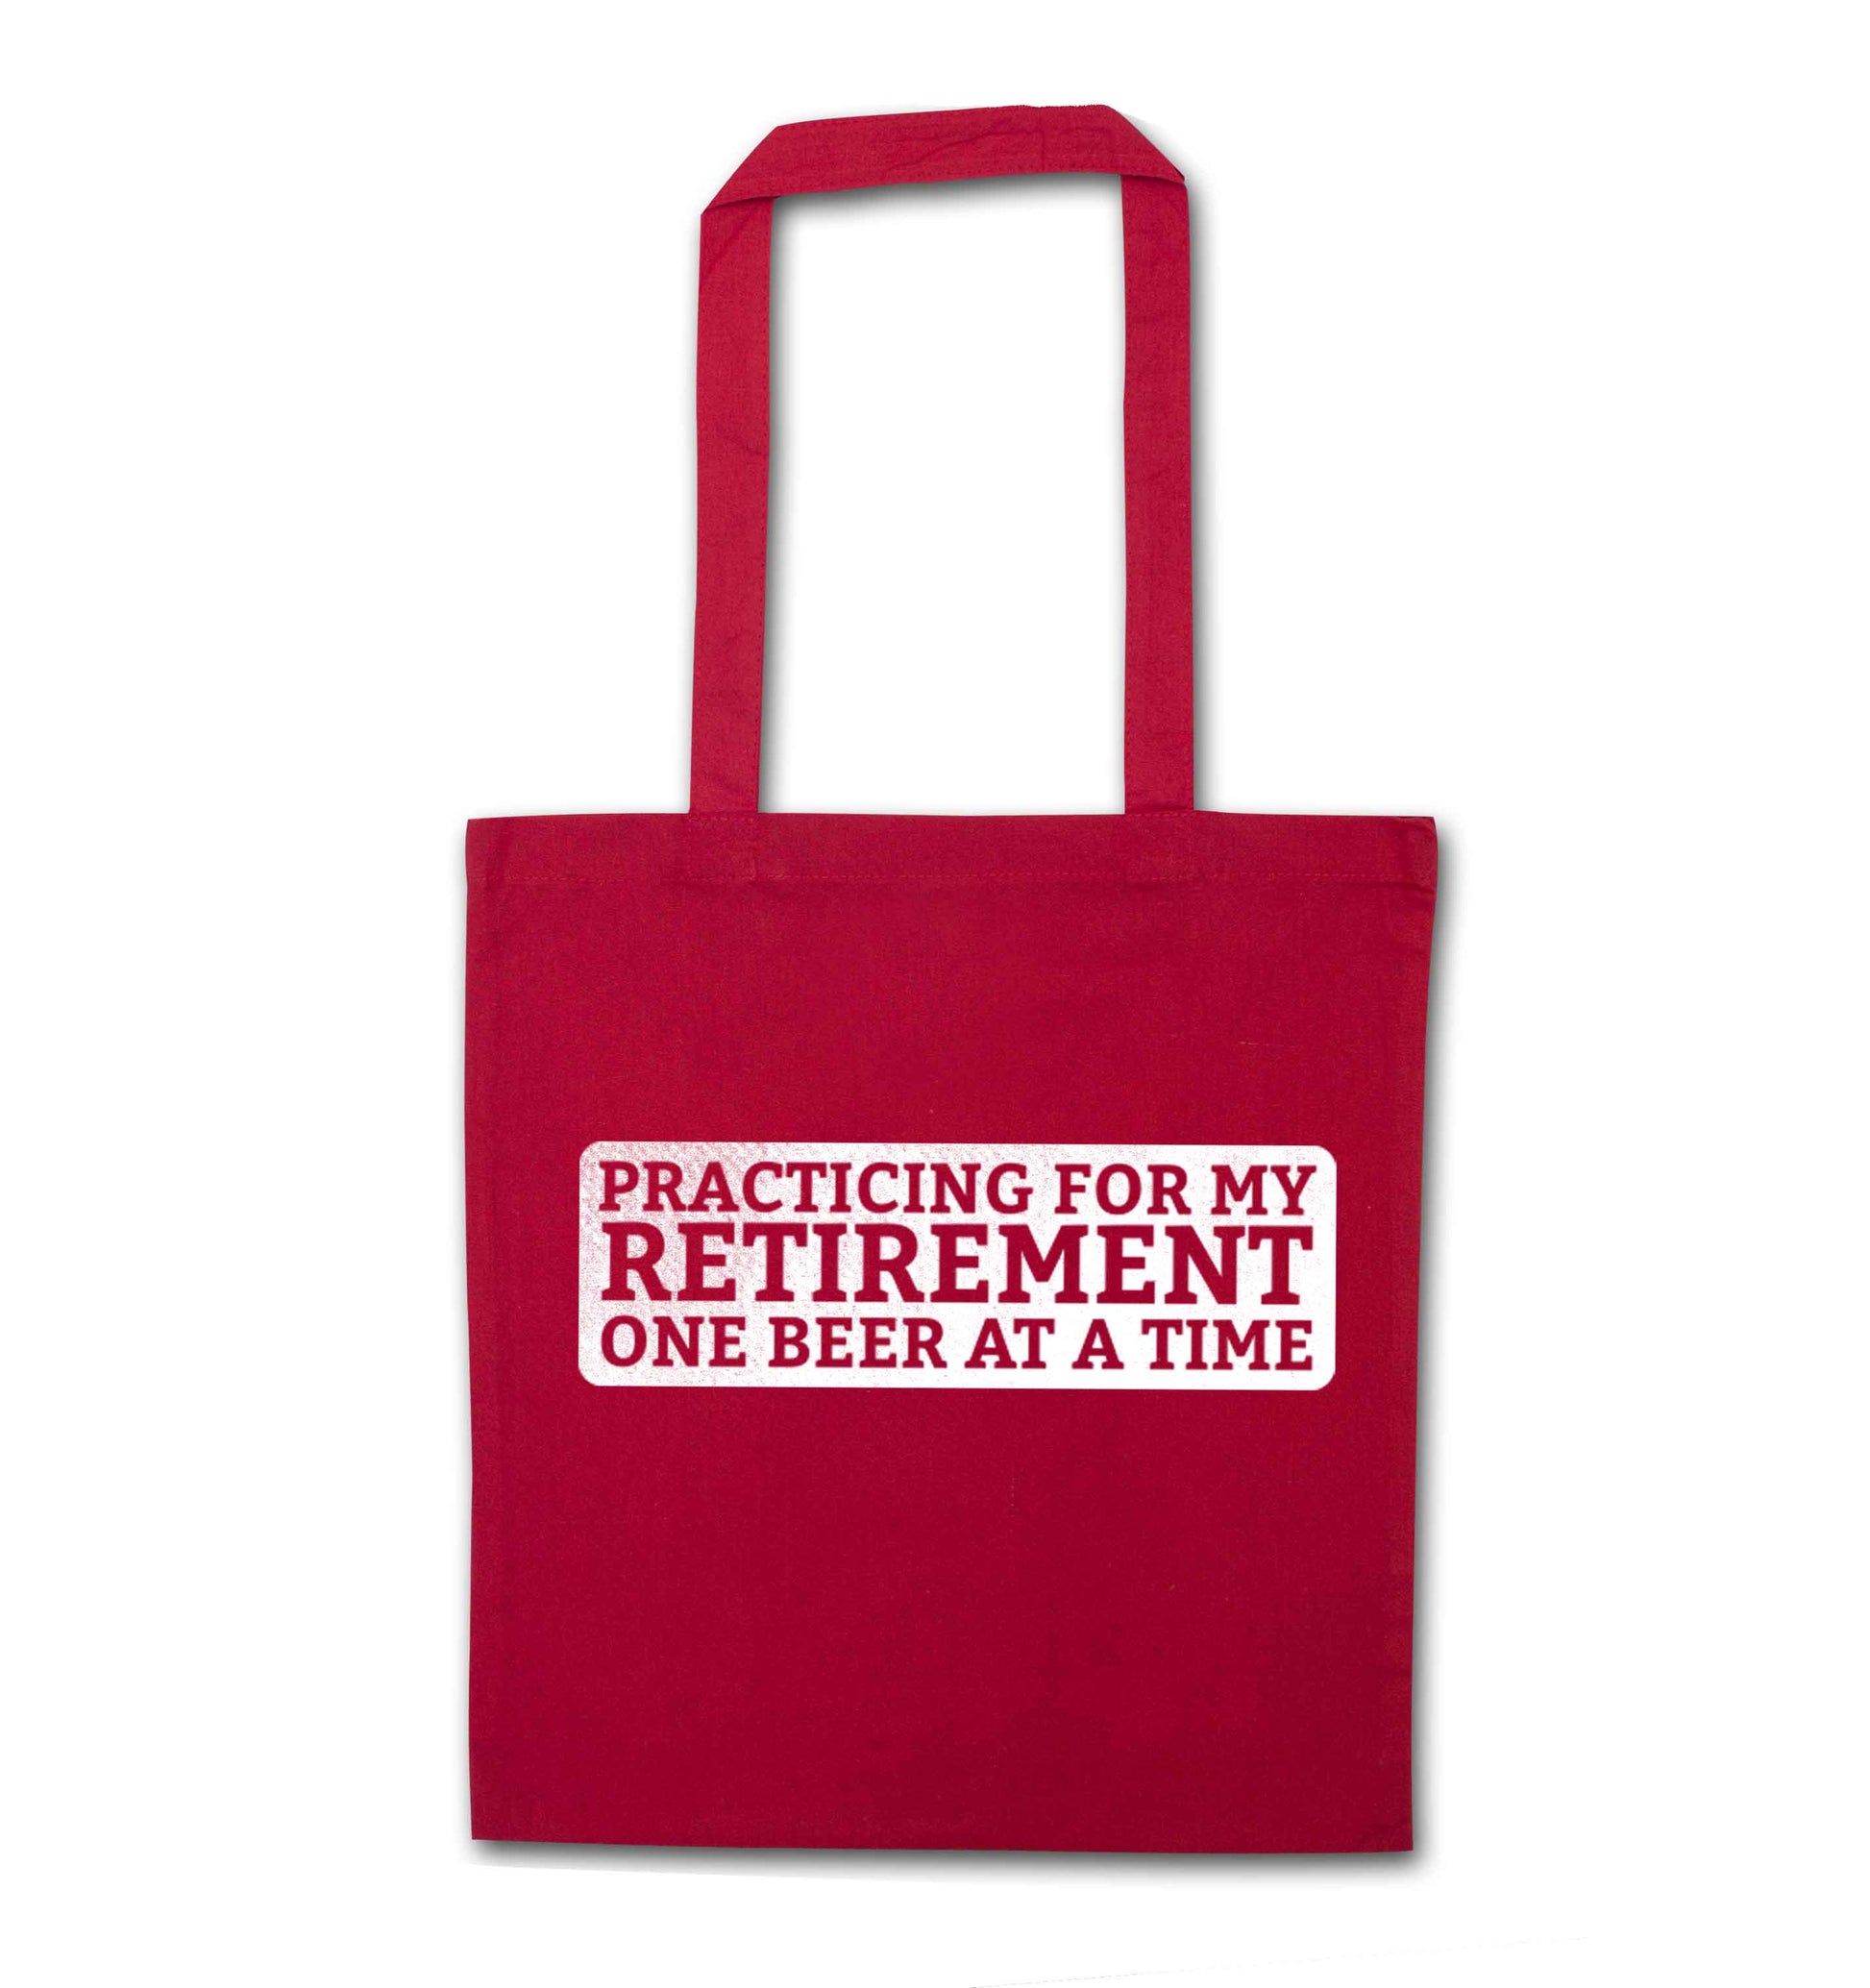 Practicing for my Retirement one Beer at a Time red tote bag